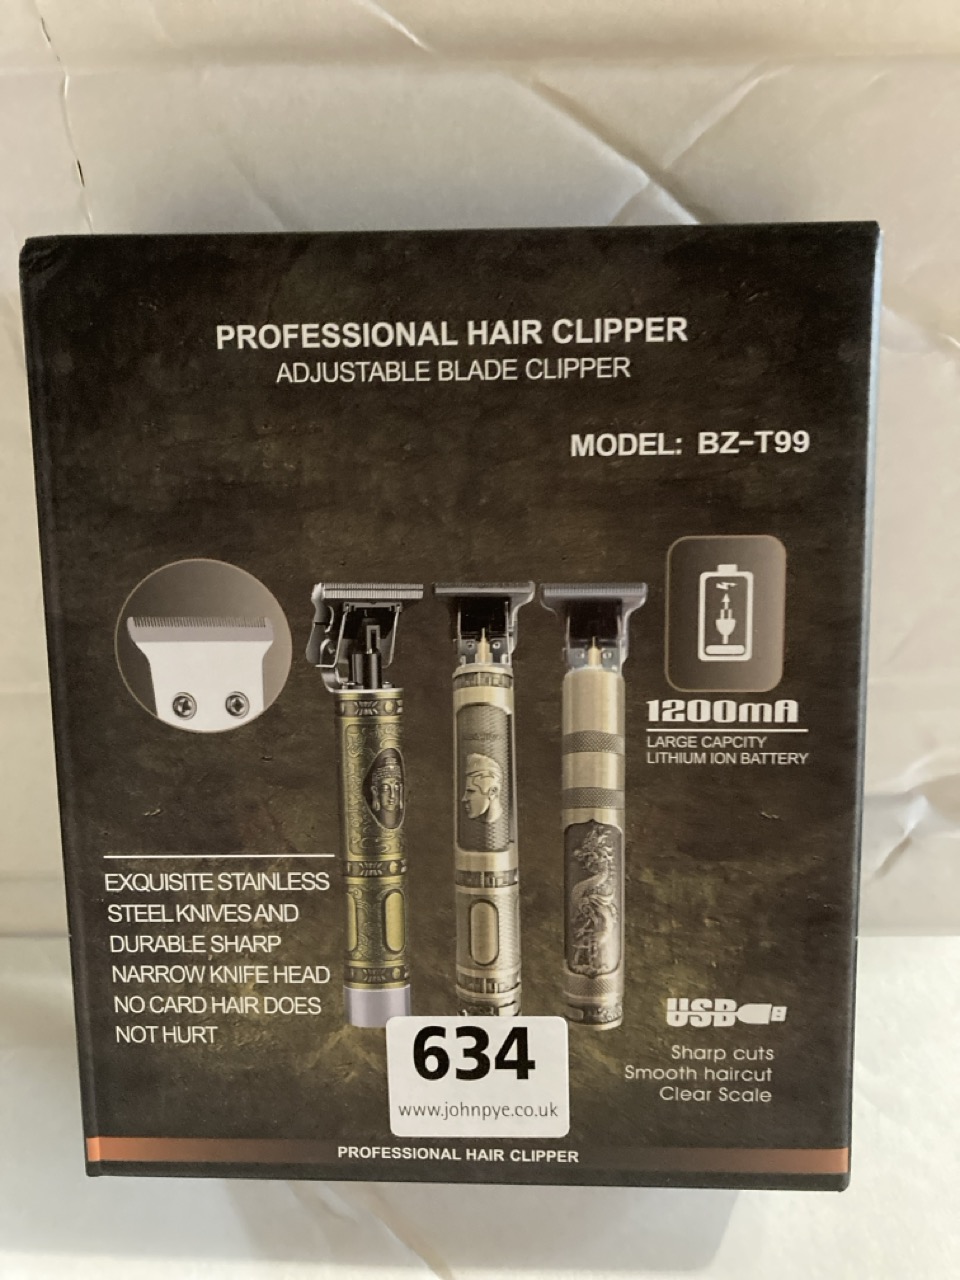 3 X TRIBAL, BZ-T99 PROFESSIONAL ADJUSTABLE HAIR CLIPPERS, STAINLESS STEEL BLADE, PRECISION STYLING. USB CHARGING.